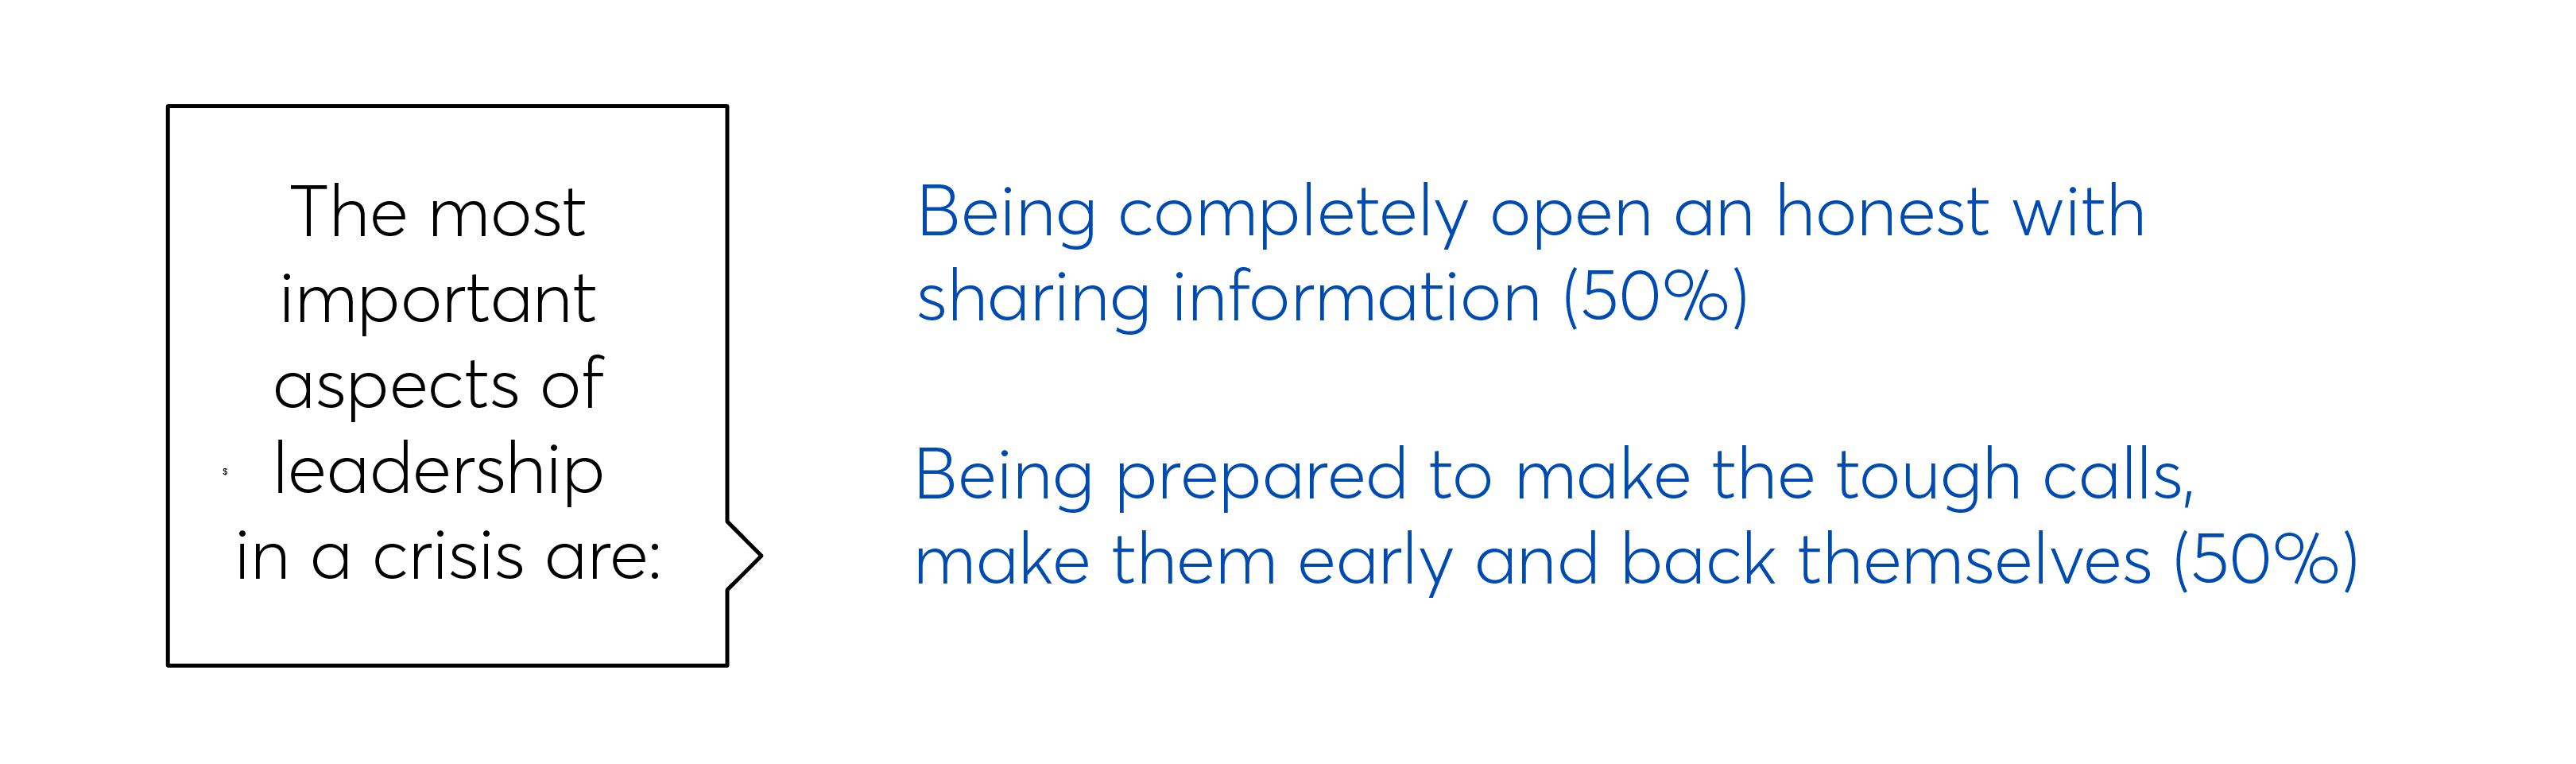 Being completely open about sharing information